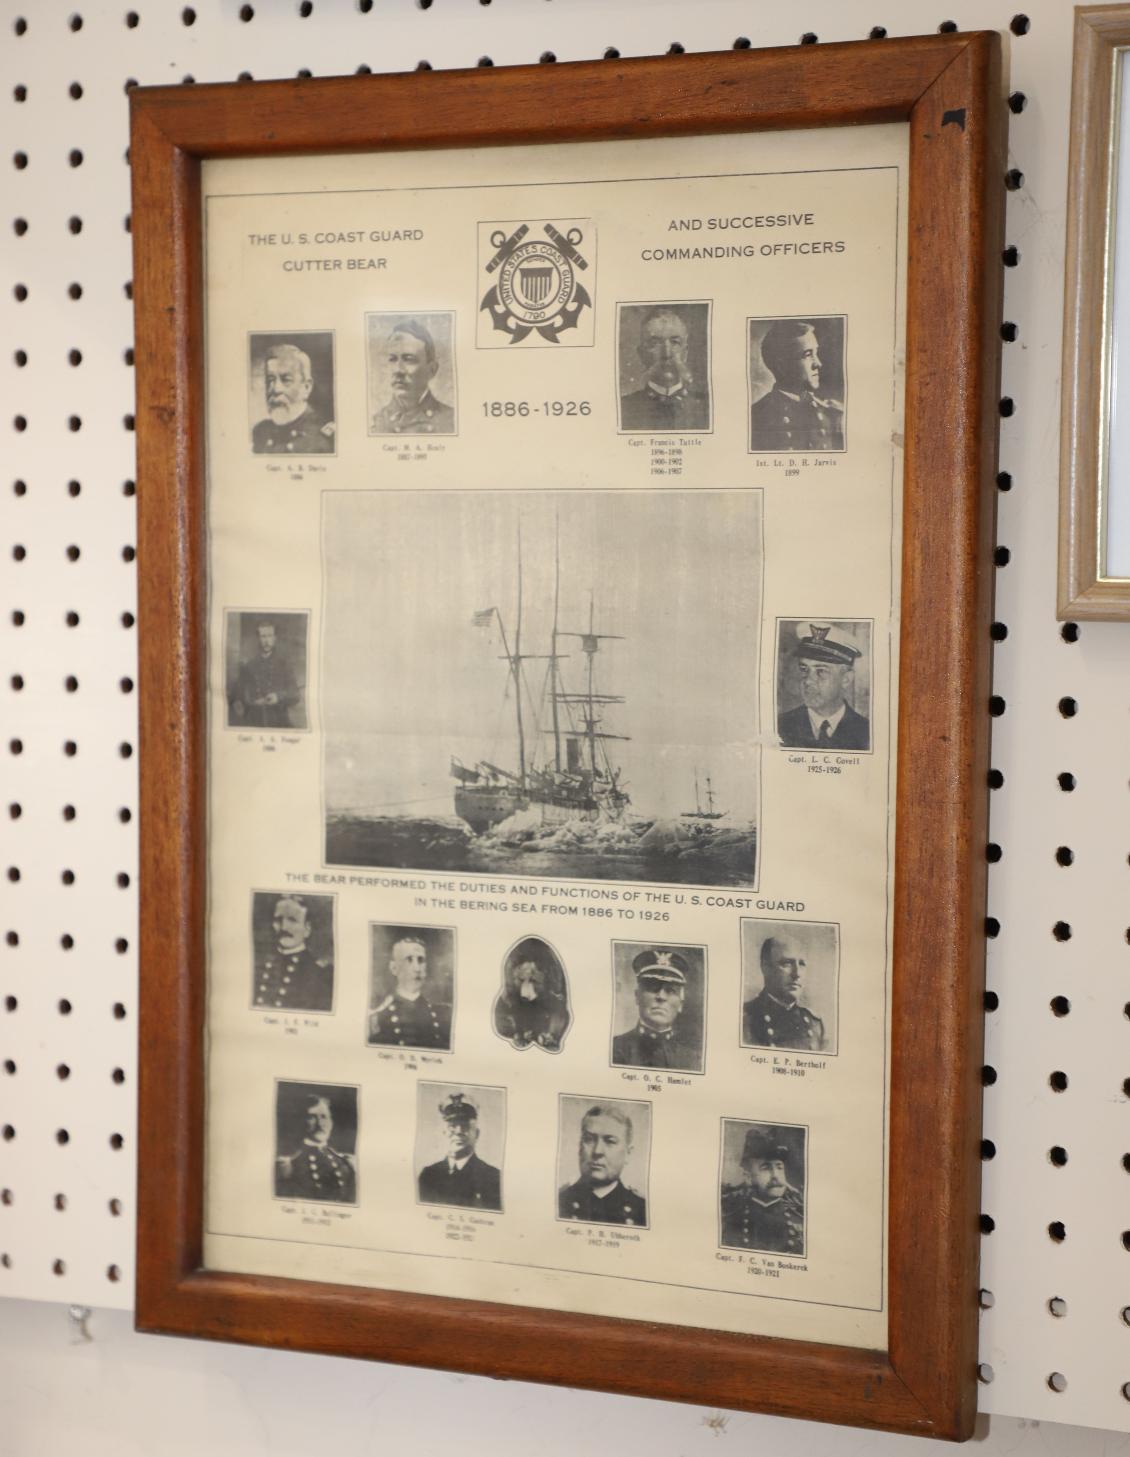 USCG Cutter Bear and Sucessive Commanding Officers - Coast Guard Heritage Museum - Barnstable Mass